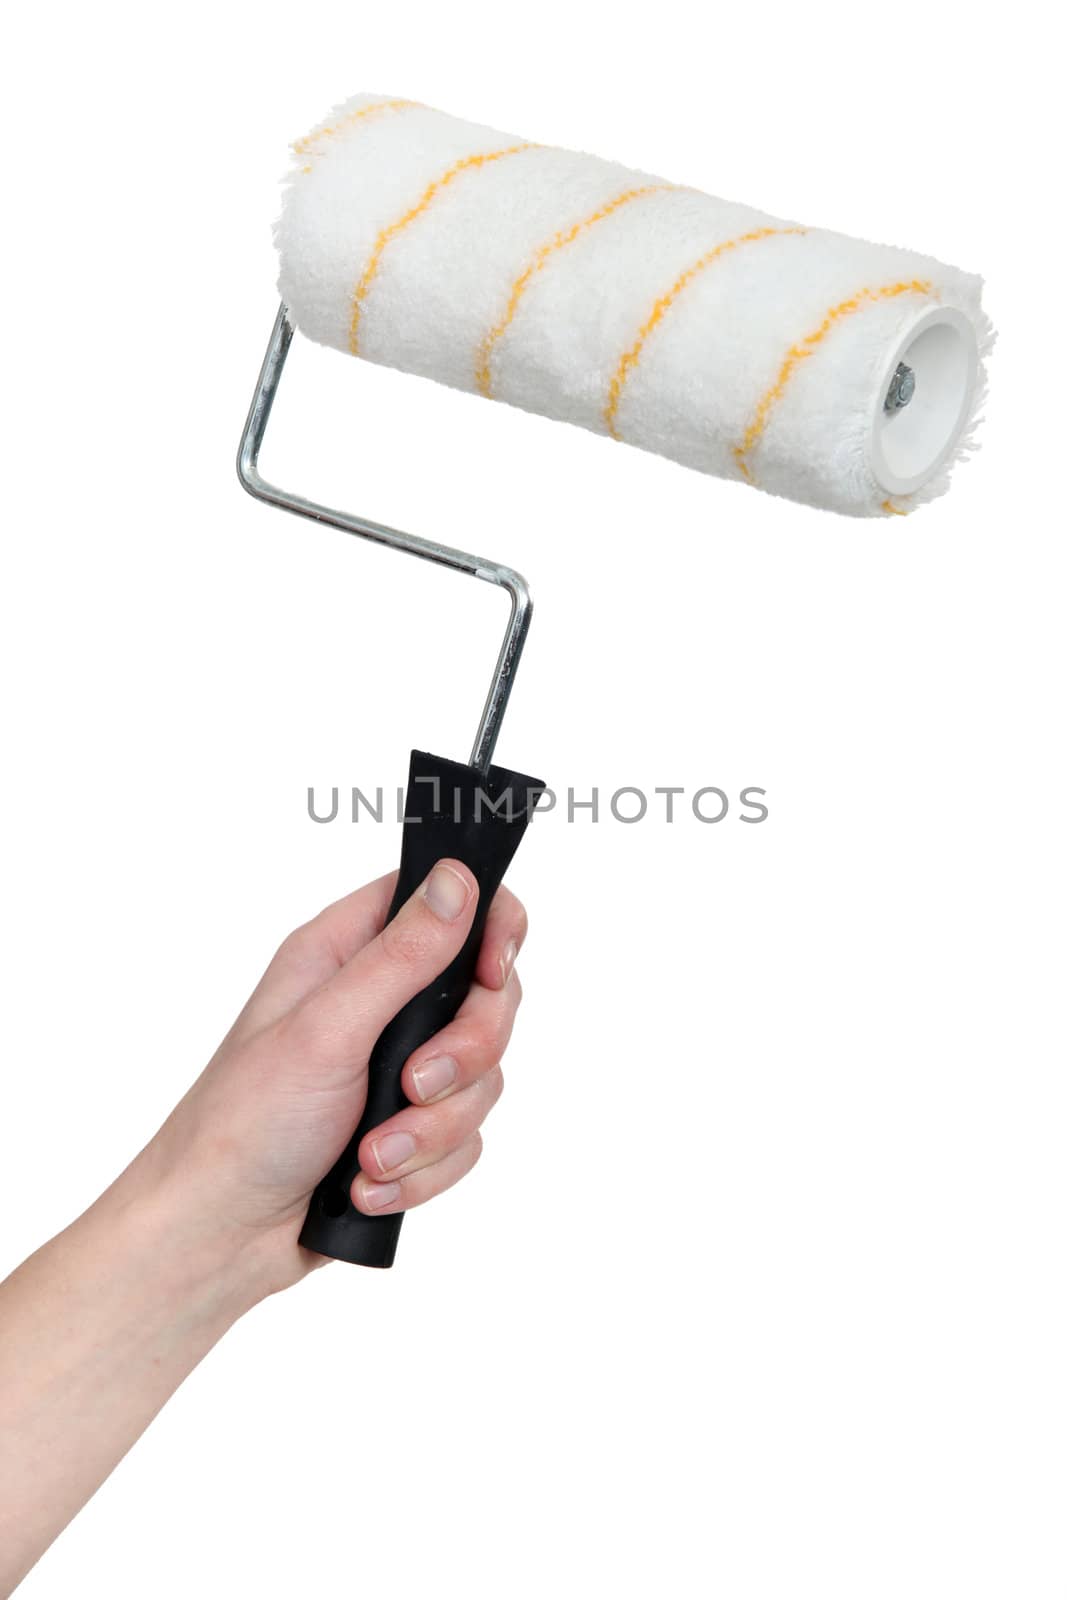 Hand holding a paint roller by phovoir